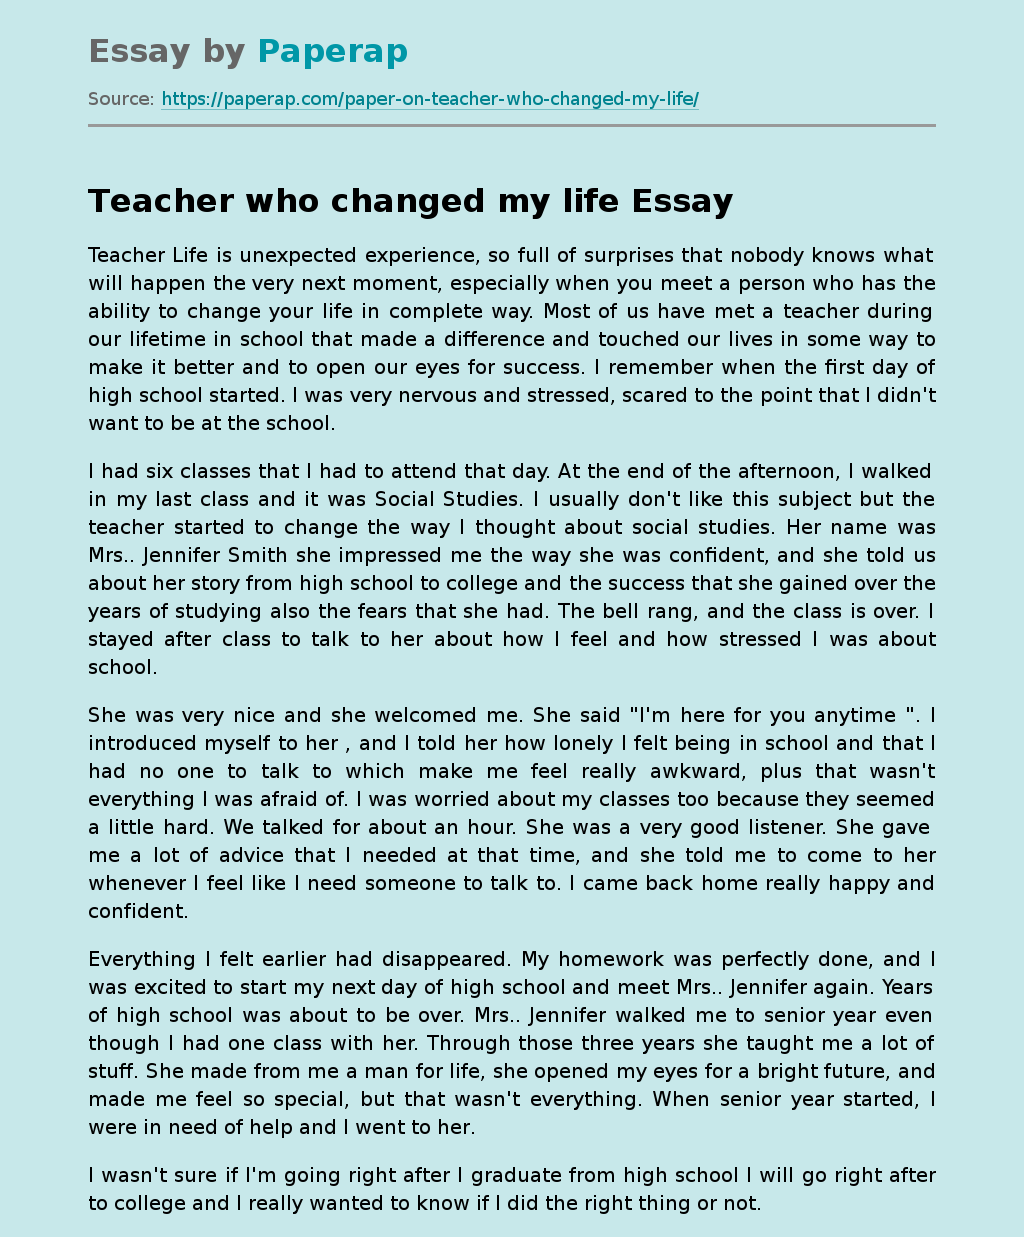 essay about something that changed my life